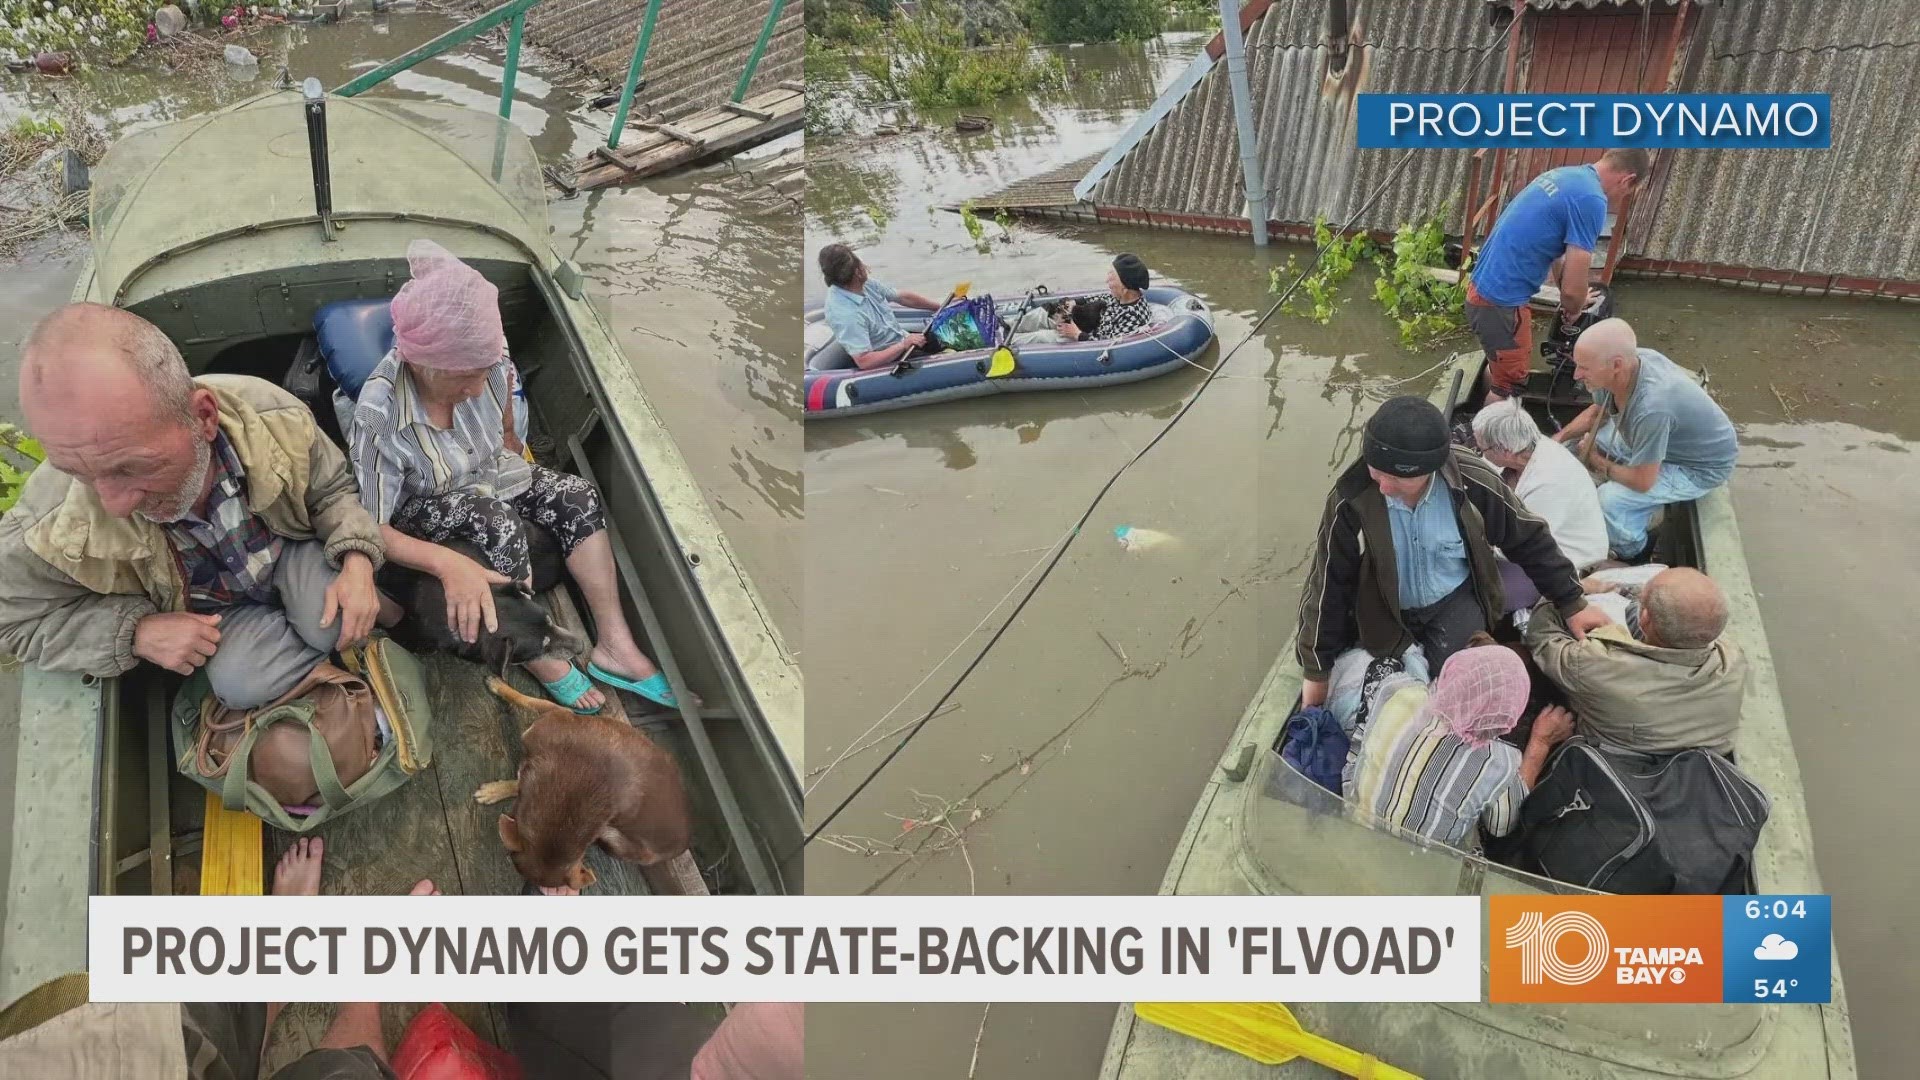 By joining Florida Voluntary Organizations Active in Disasters, or FLVOAD, Project Dynamo has access to state money and resources to help in future disasters.